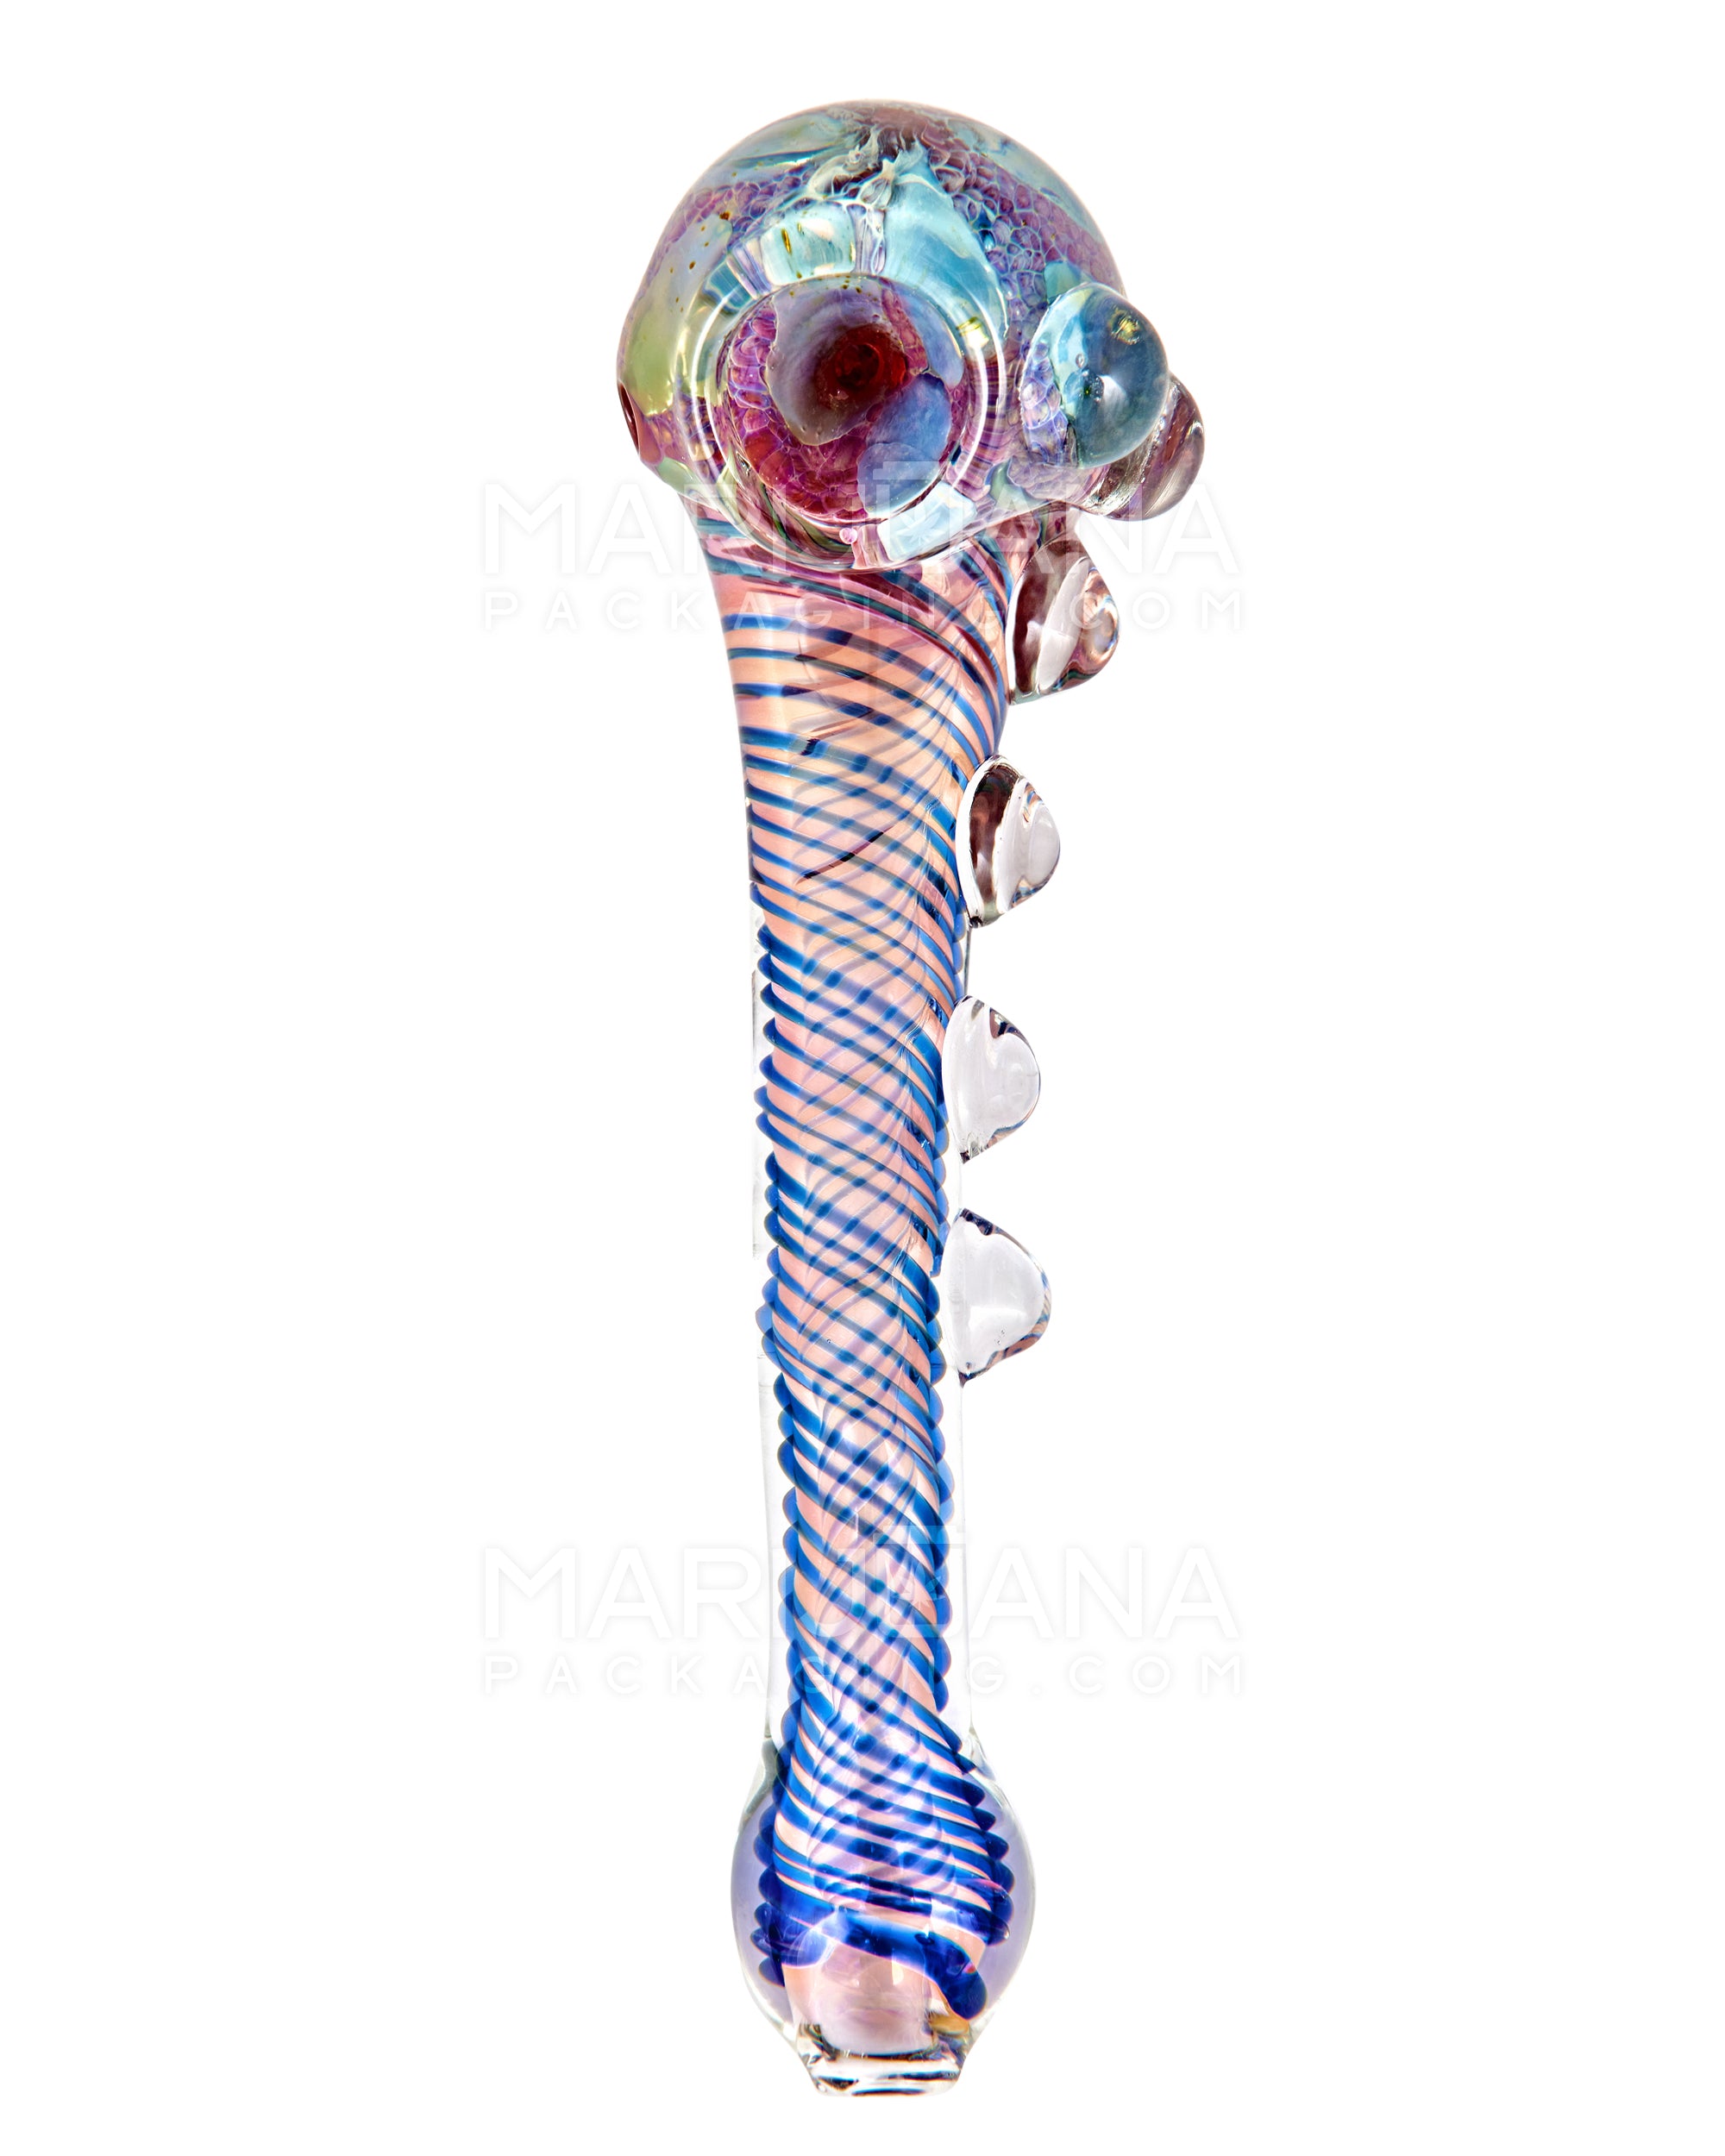 Frit & Pink Fumed Spiral Sherlock Hand Pipe w/ Bubble Trap & Multi Knockers | 6in Long - Glass - Assorted - 2